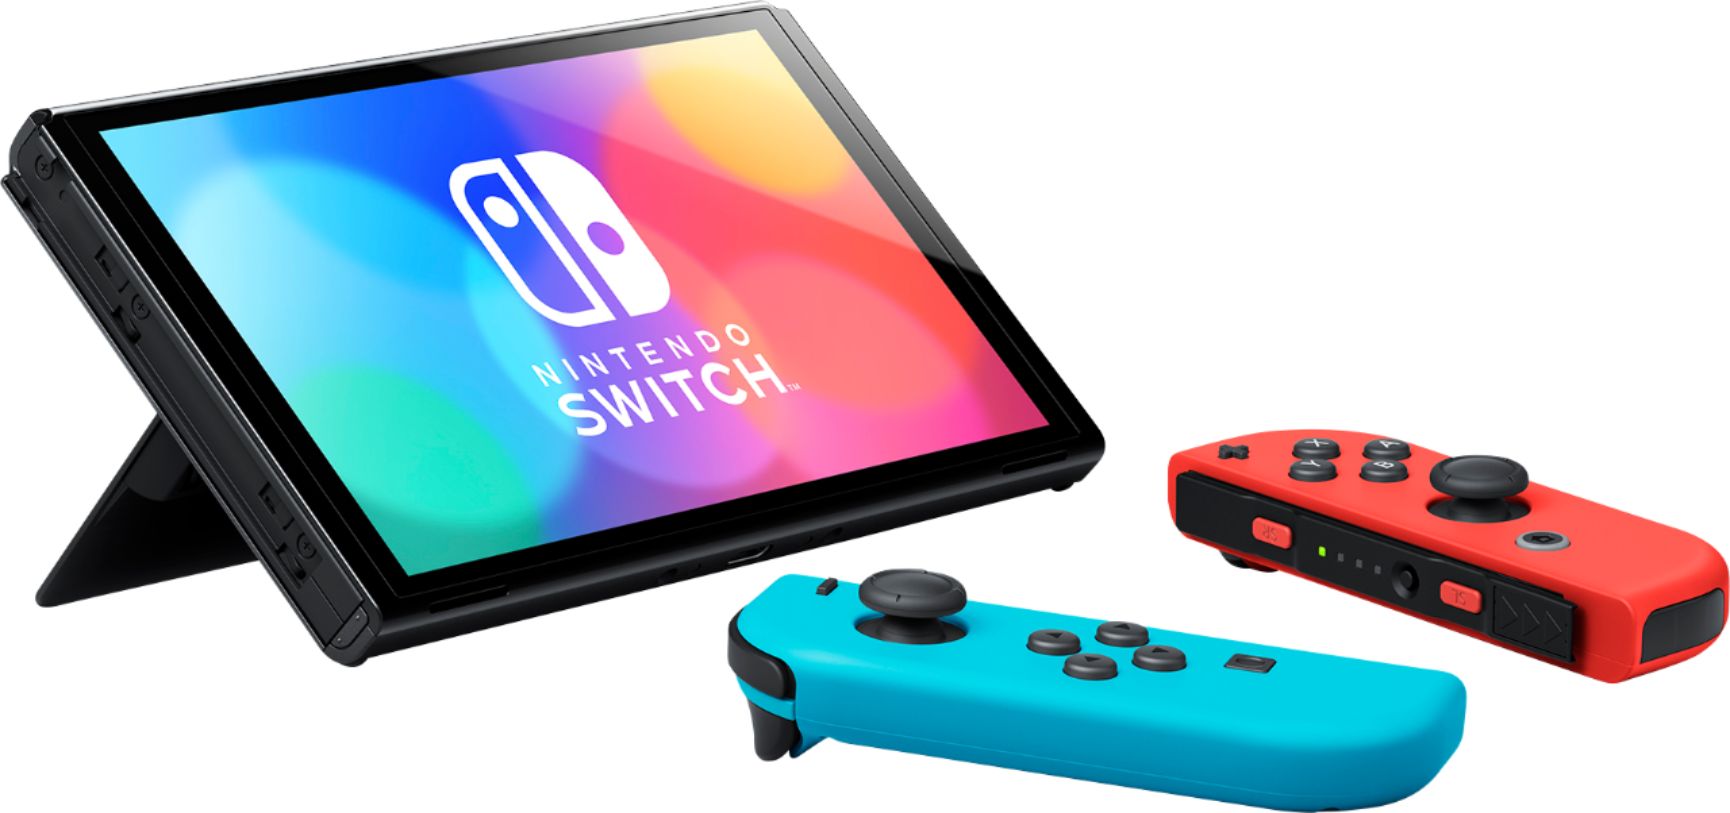 2022 New Nintendo Switch OLED Model Neon Red & Blue Joy Con 64GB Console HD Screen & LAN-Port Dock with Paper Mario: The Origami King, Mytrix Wireless Switch Pro Controller and Accessories